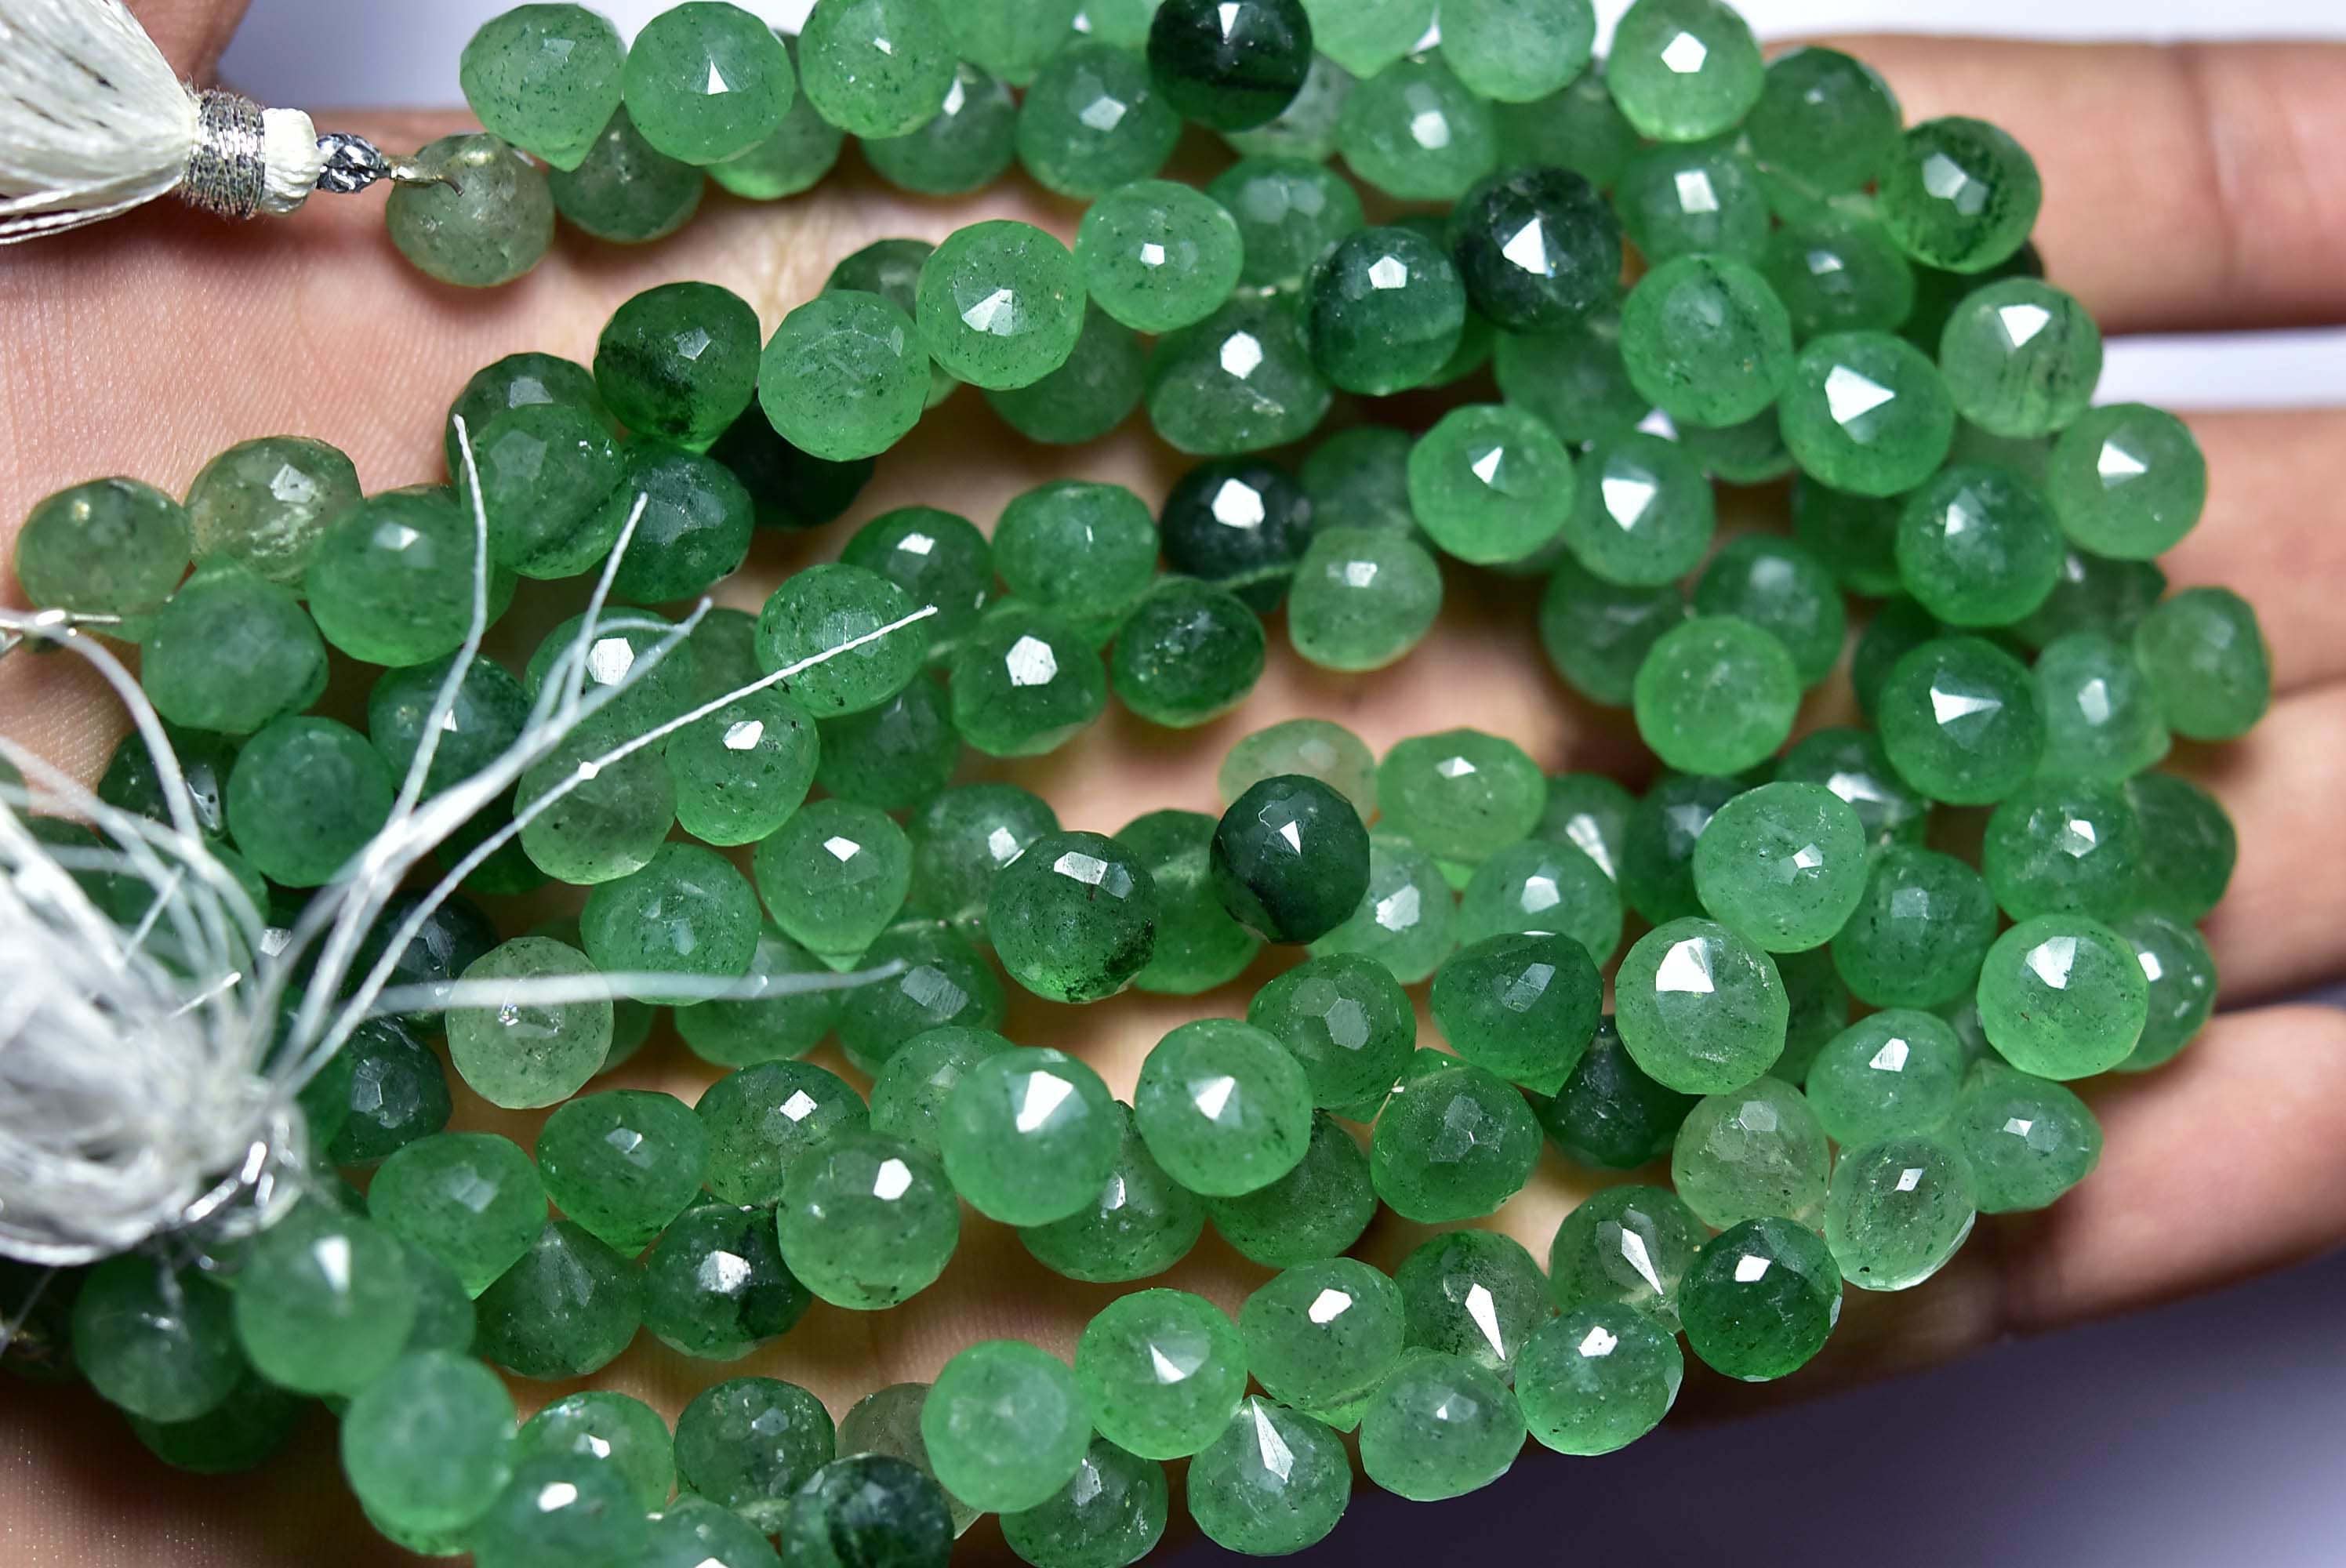 8.50 inches,Natural Big Amazing Green Strawberry Quartz Faceted Onion Briolettes,Size is 8.50-9mm #754